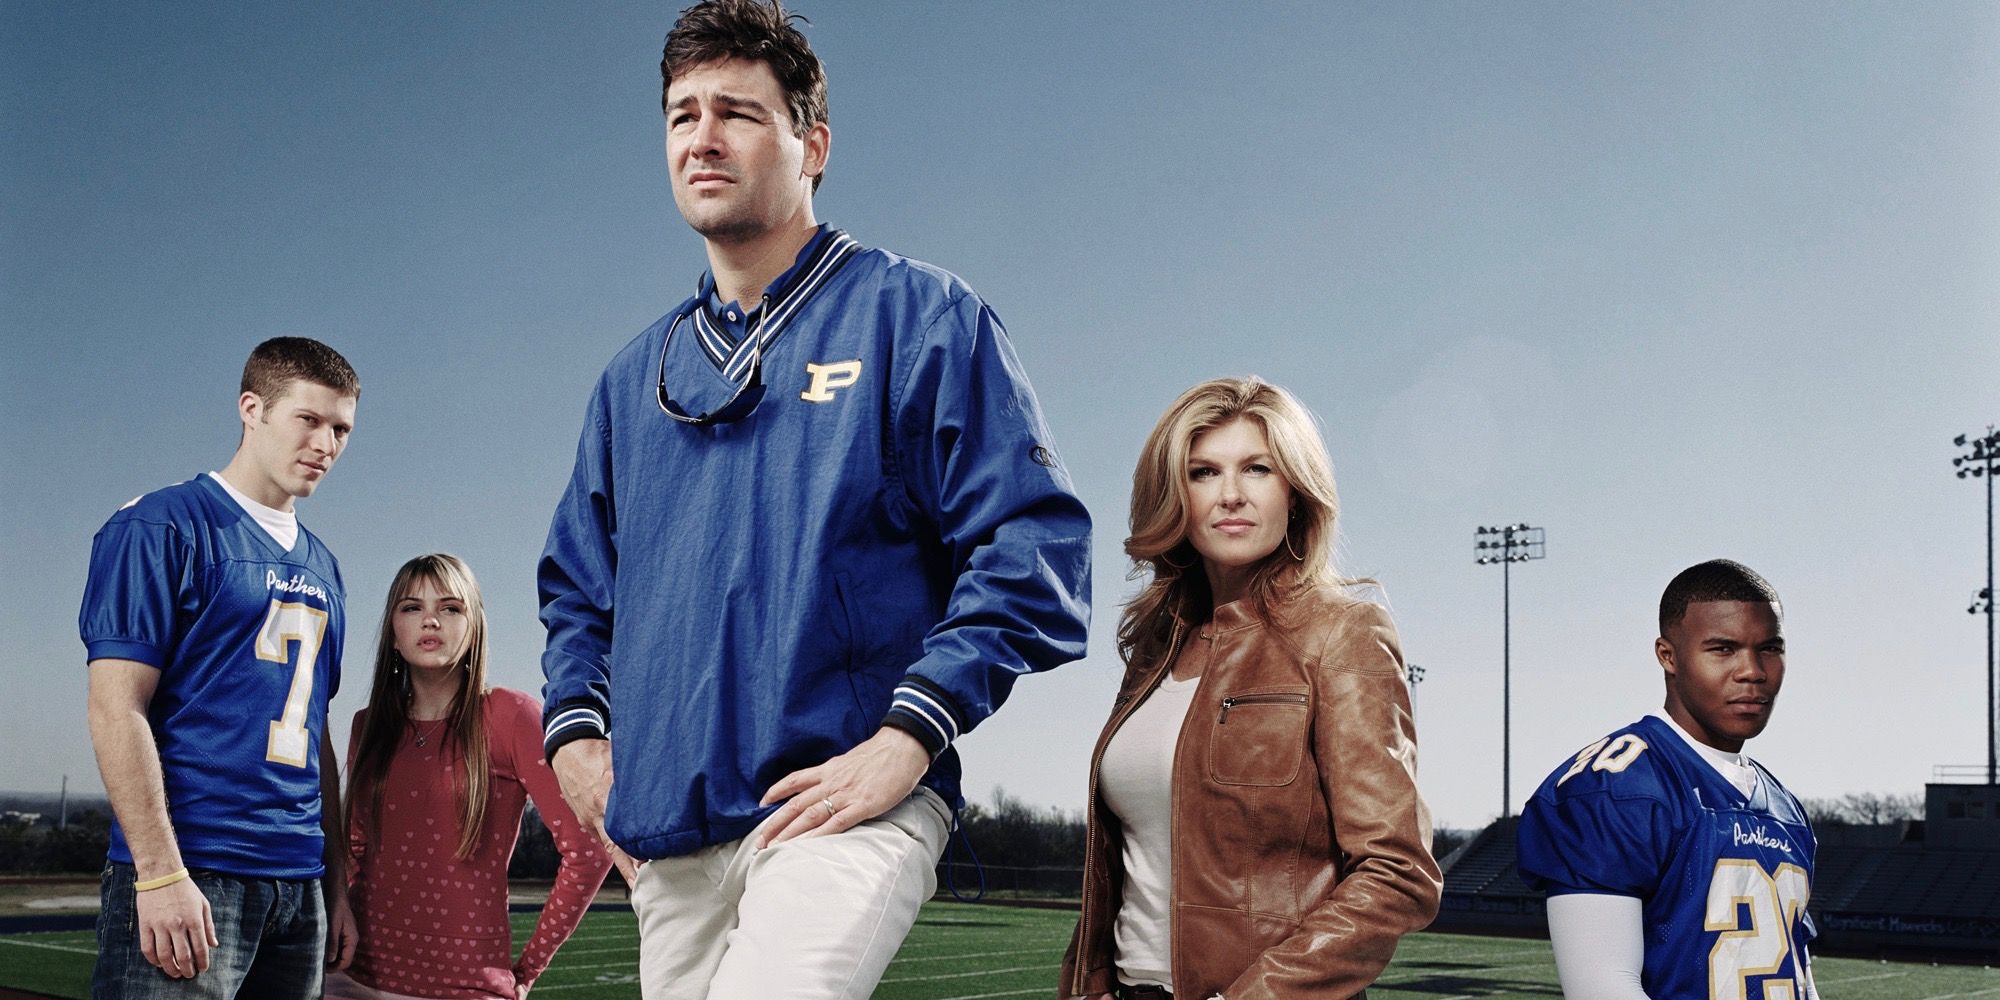 All 5 Seasons of 'Friday Night Lights' Are Now on Netflix - PureWow